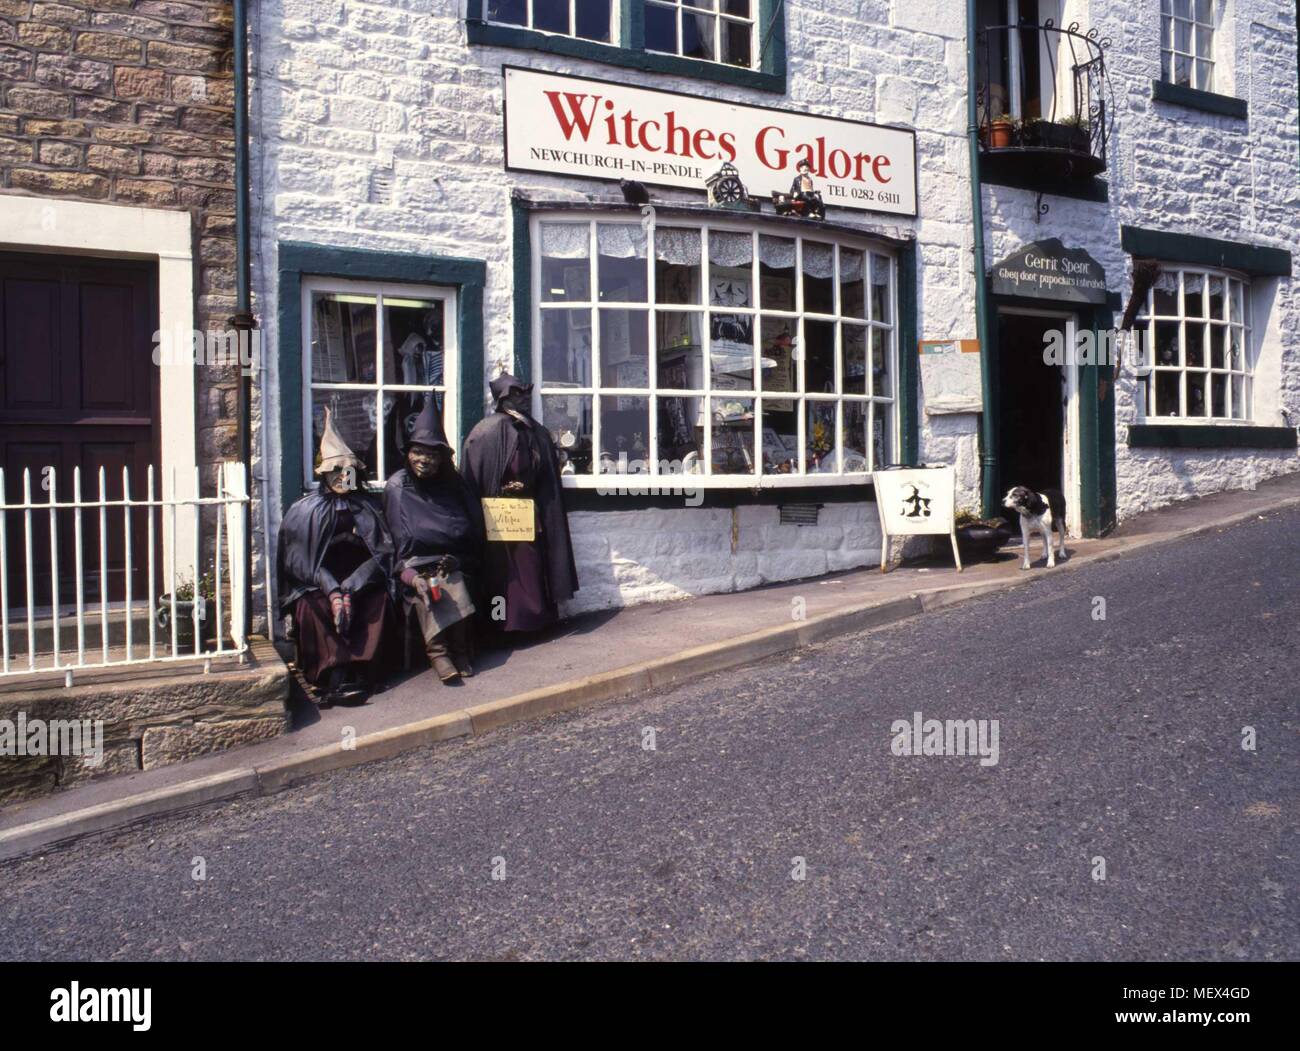 Witches Galore shop, Newchurch-in-Pendle, Pendle, Lancashire, England Stock Photo